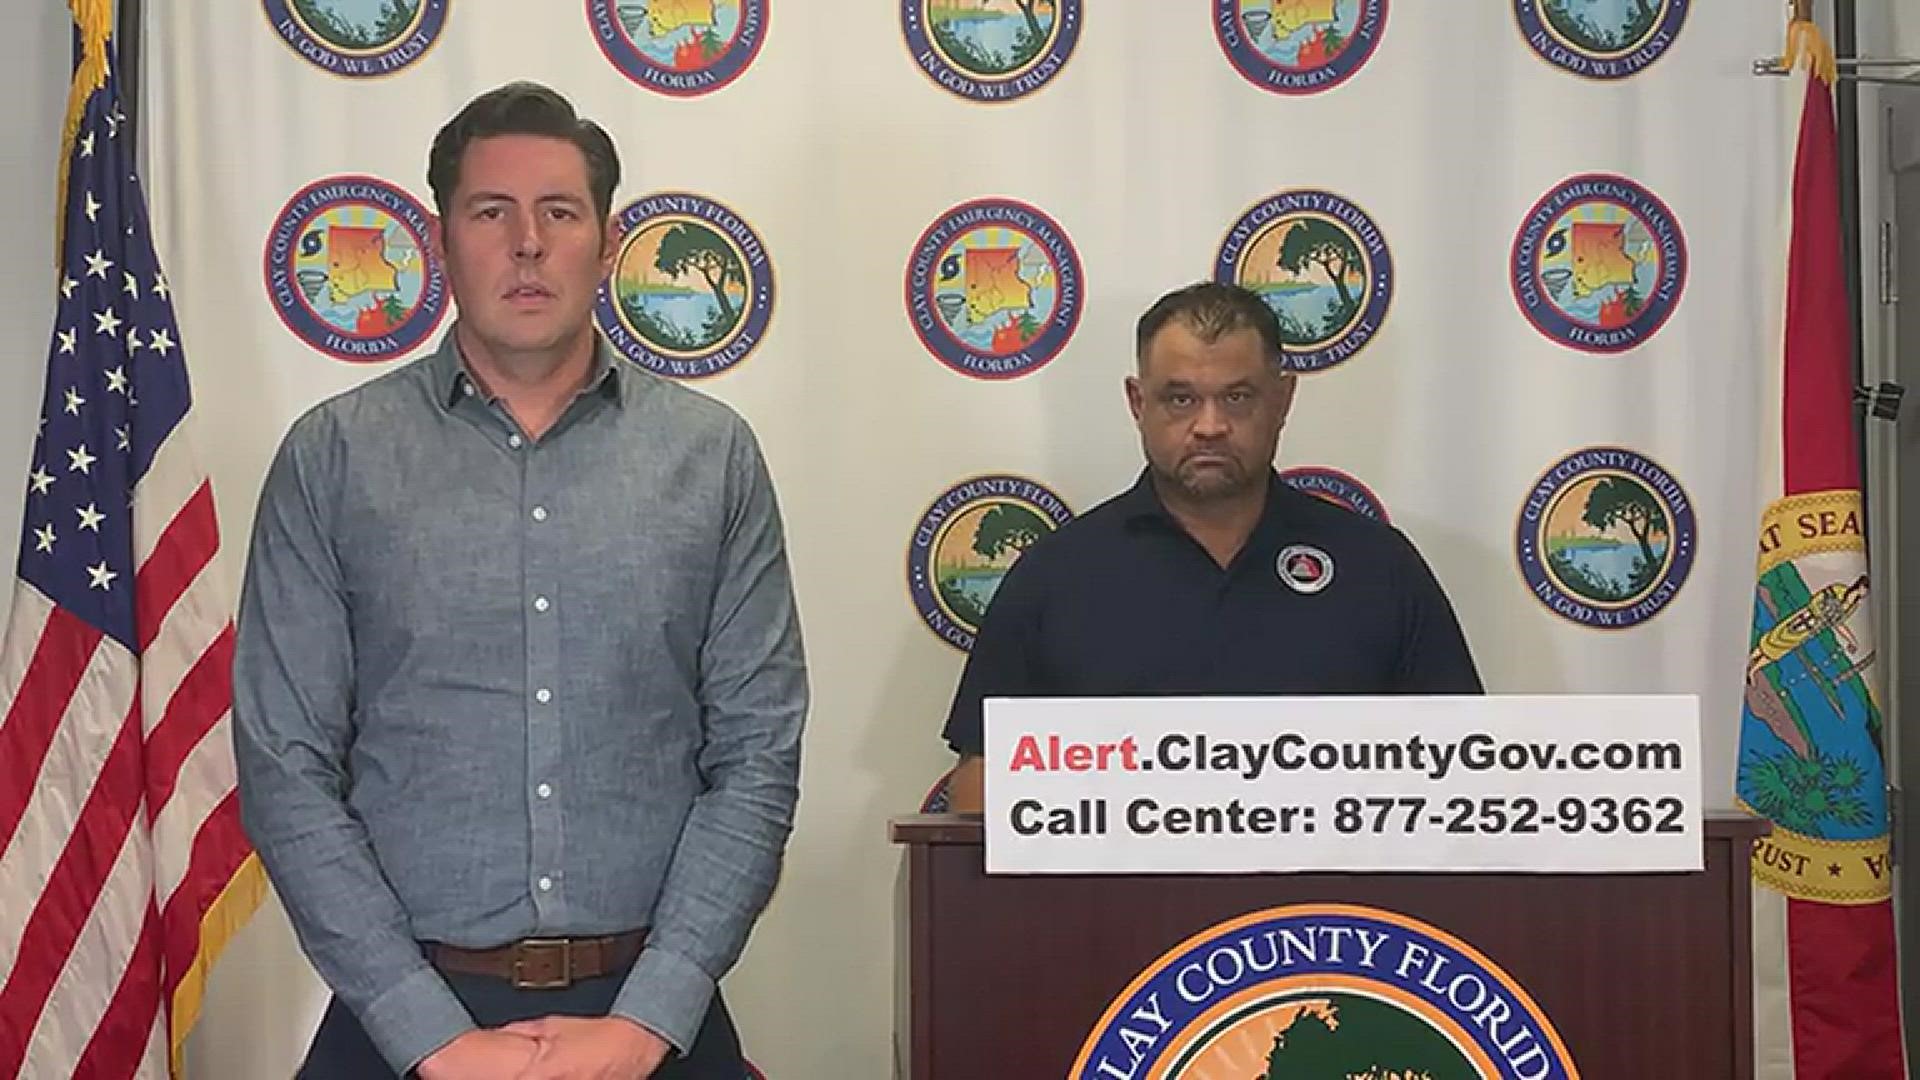 Deputy Director Mike Ladd gives residents the latest information on what Clay County can expect as we experience rising water levels along the St. John’s River.